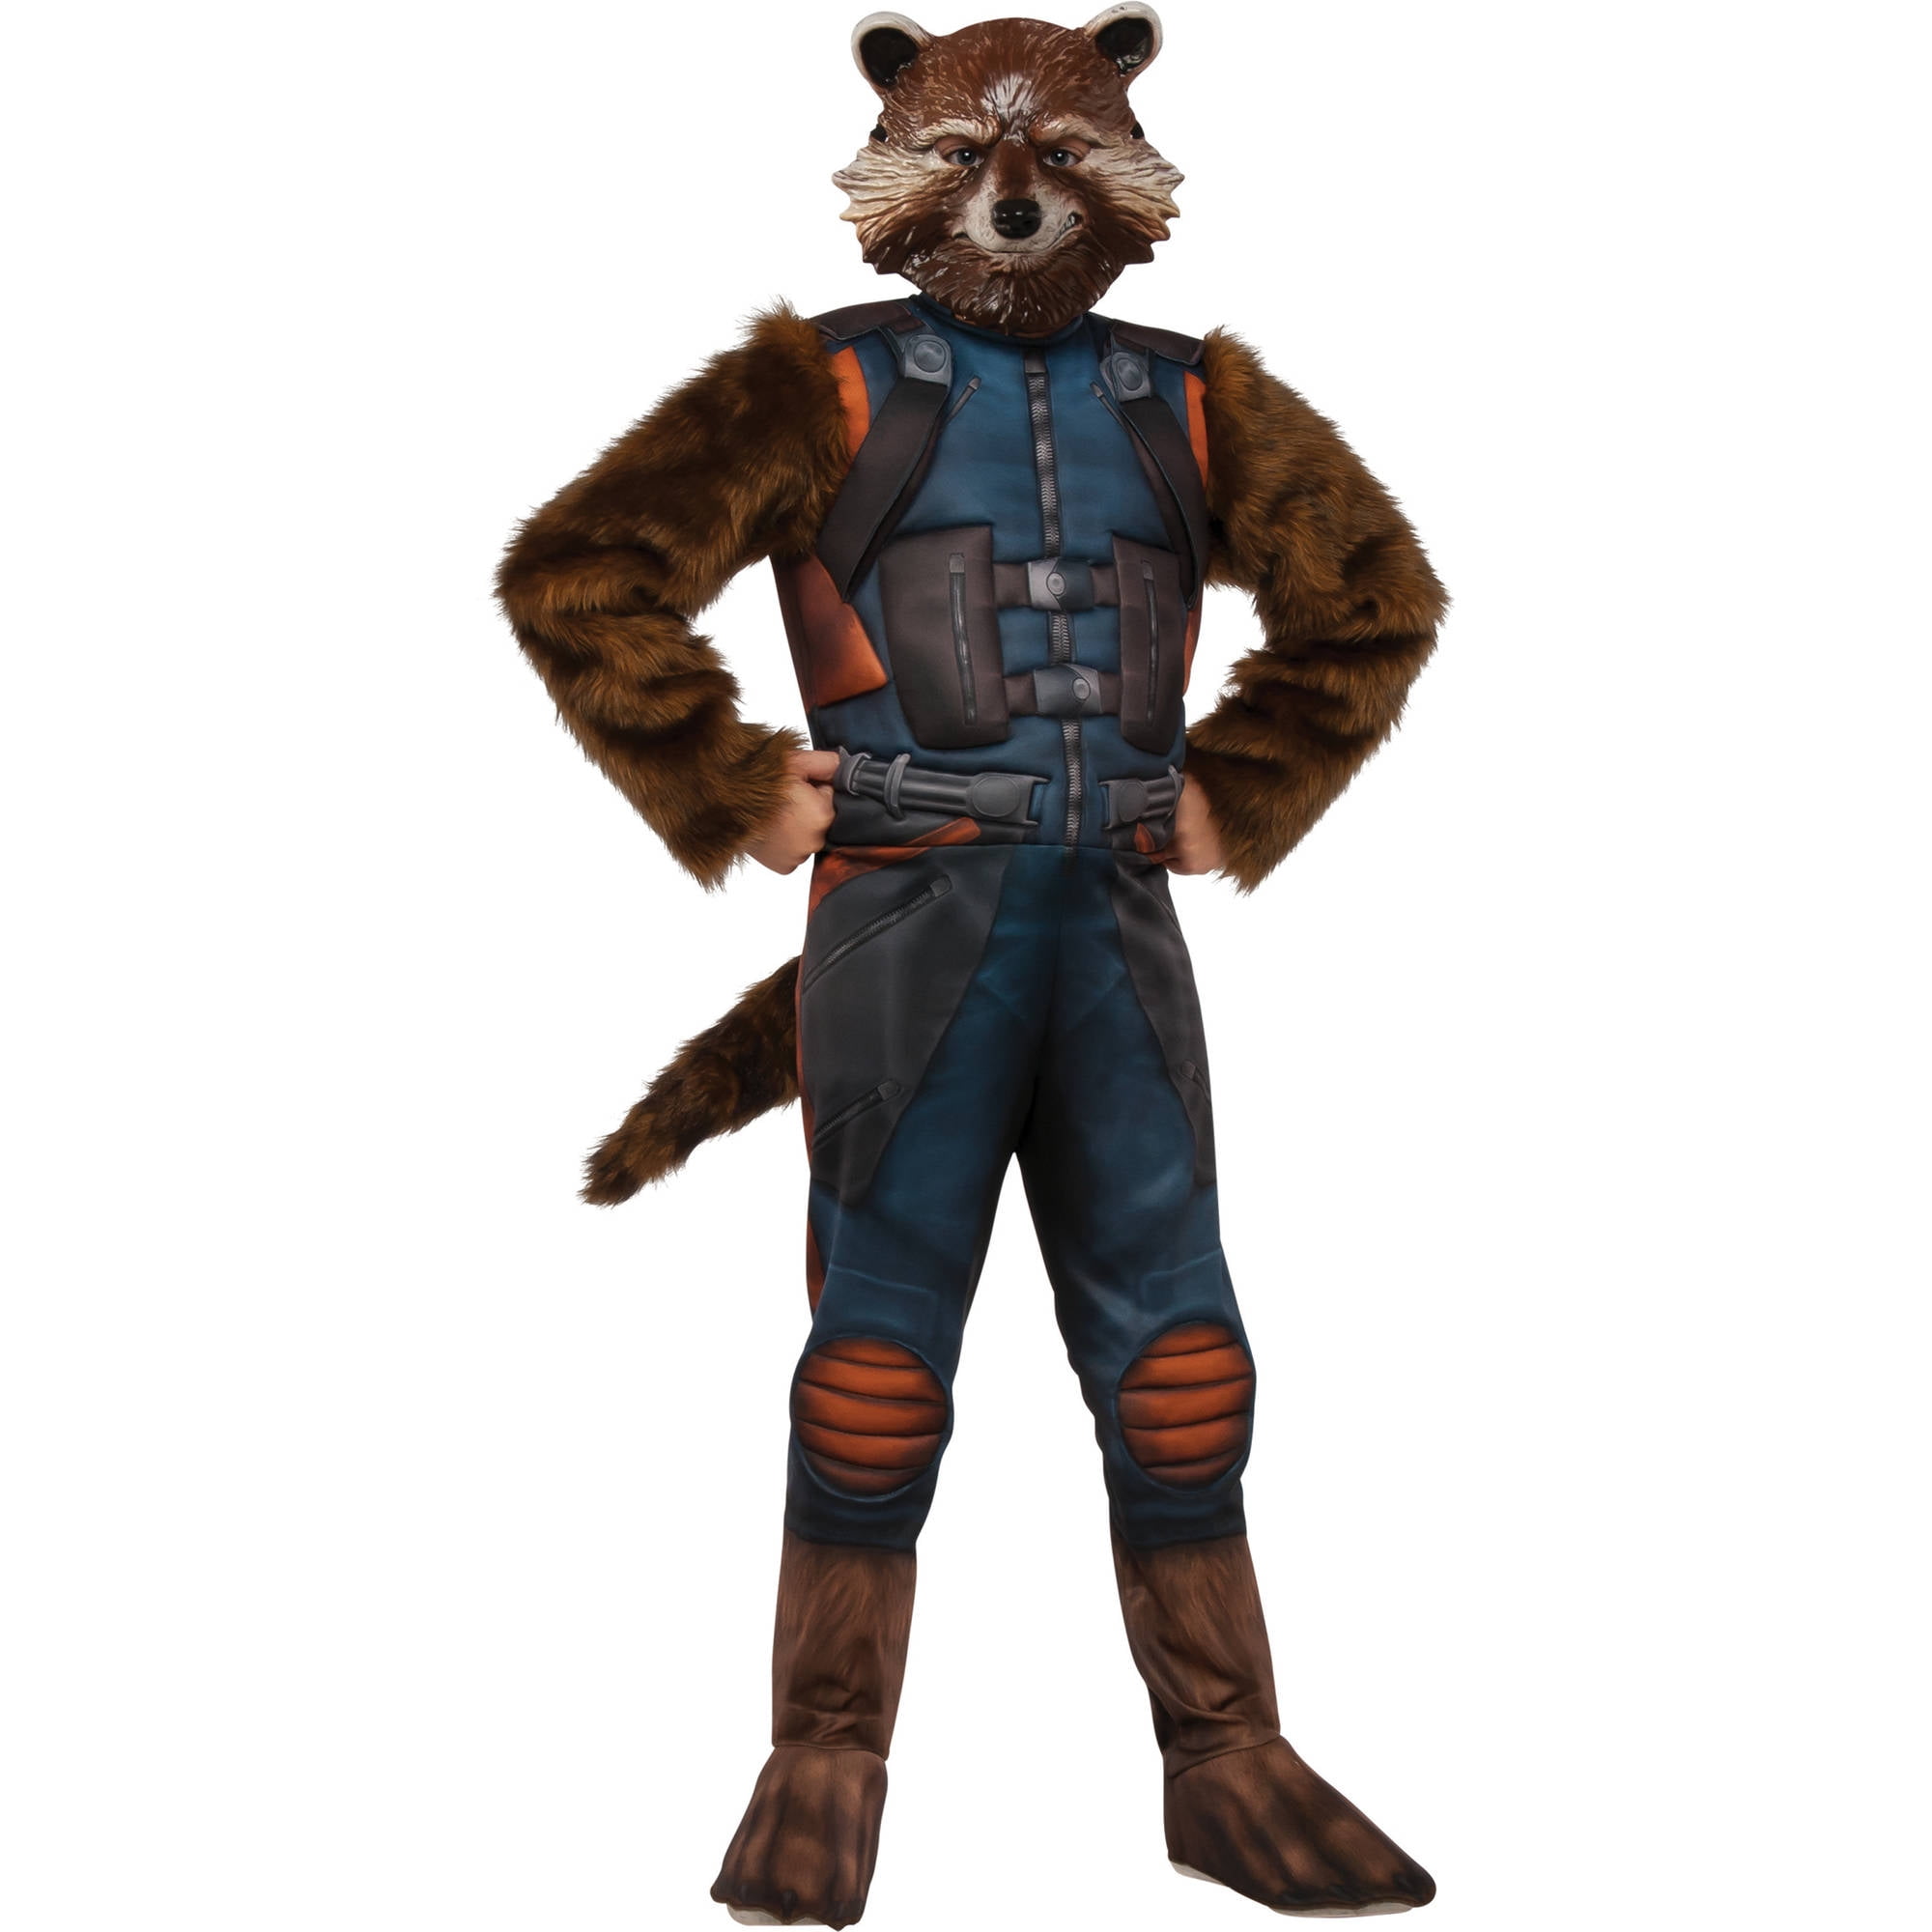 Details about   Rocket Raccoon Guardian of the Galaxy Boy Costume Medium L 8 10 by Rubies 35620 